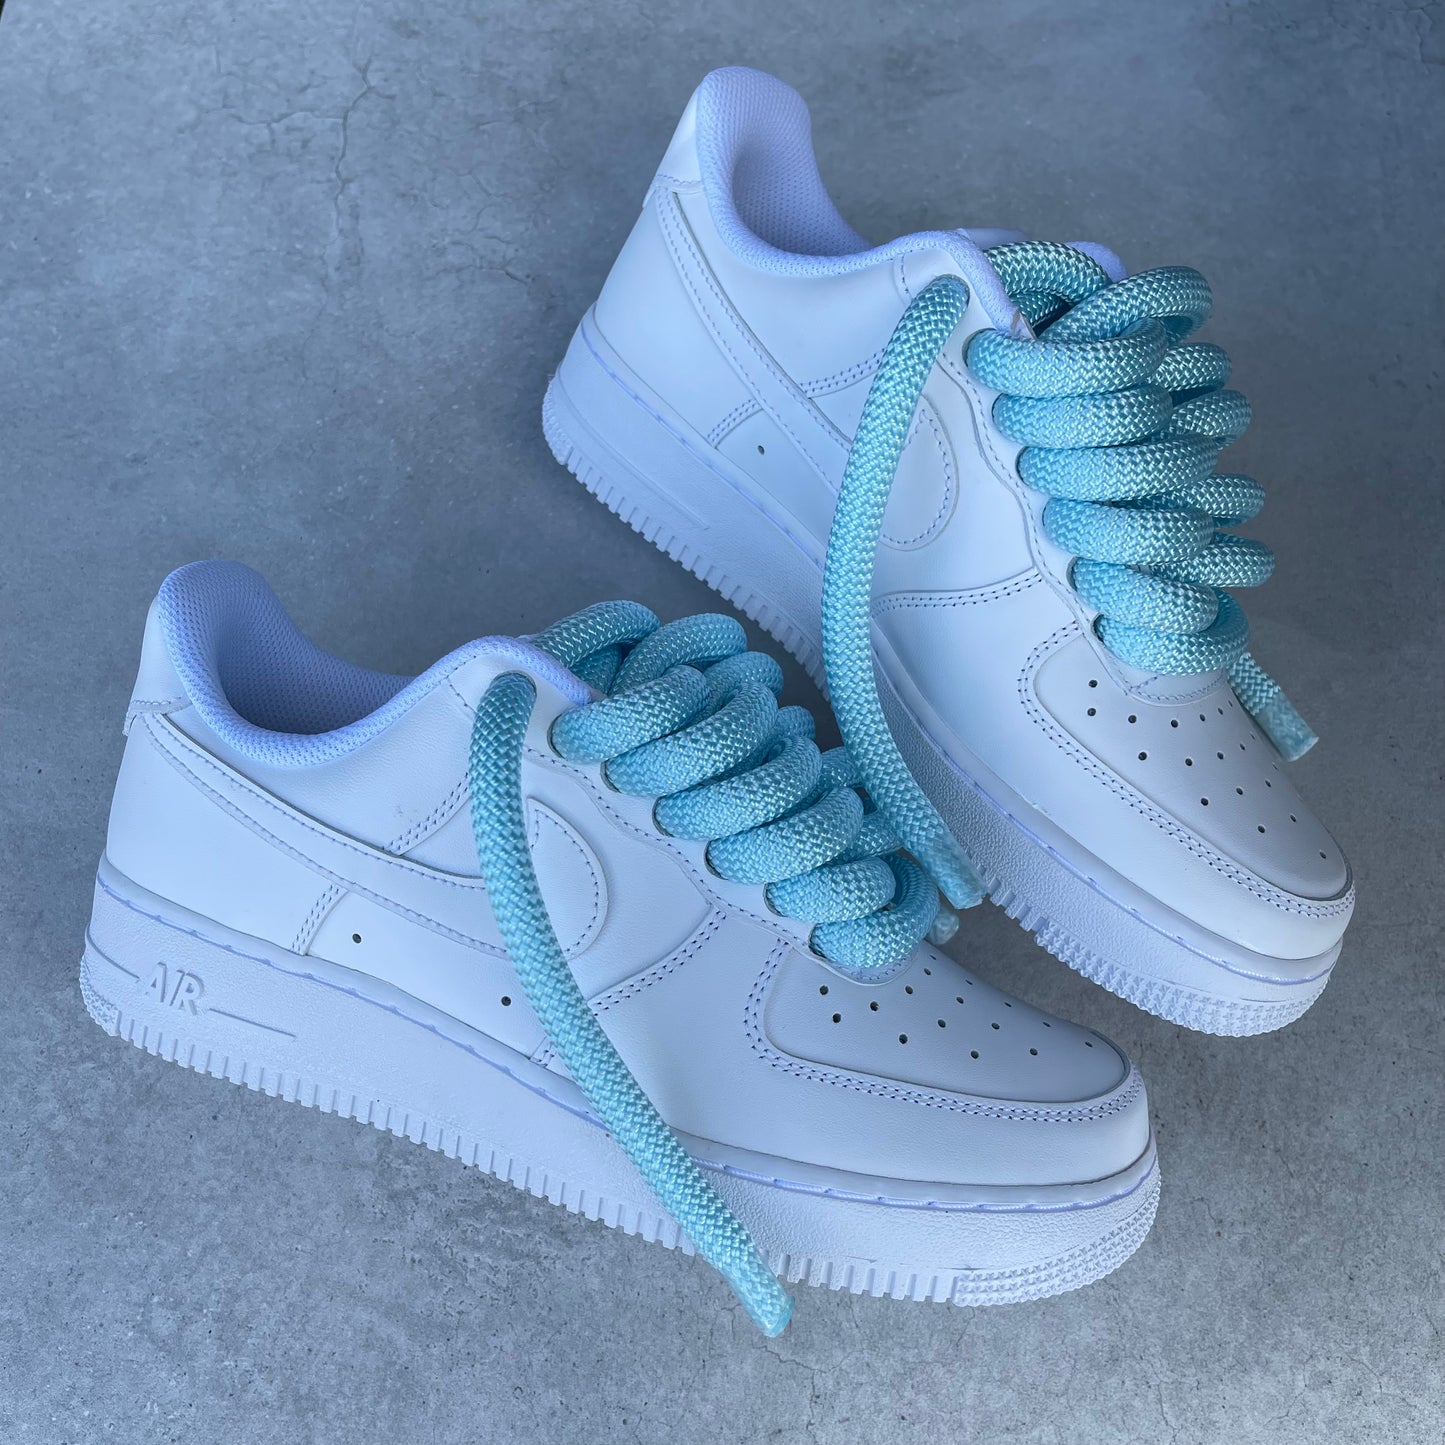 Custom AIR FORCE 1 - Rope laces 2.0 (blue)